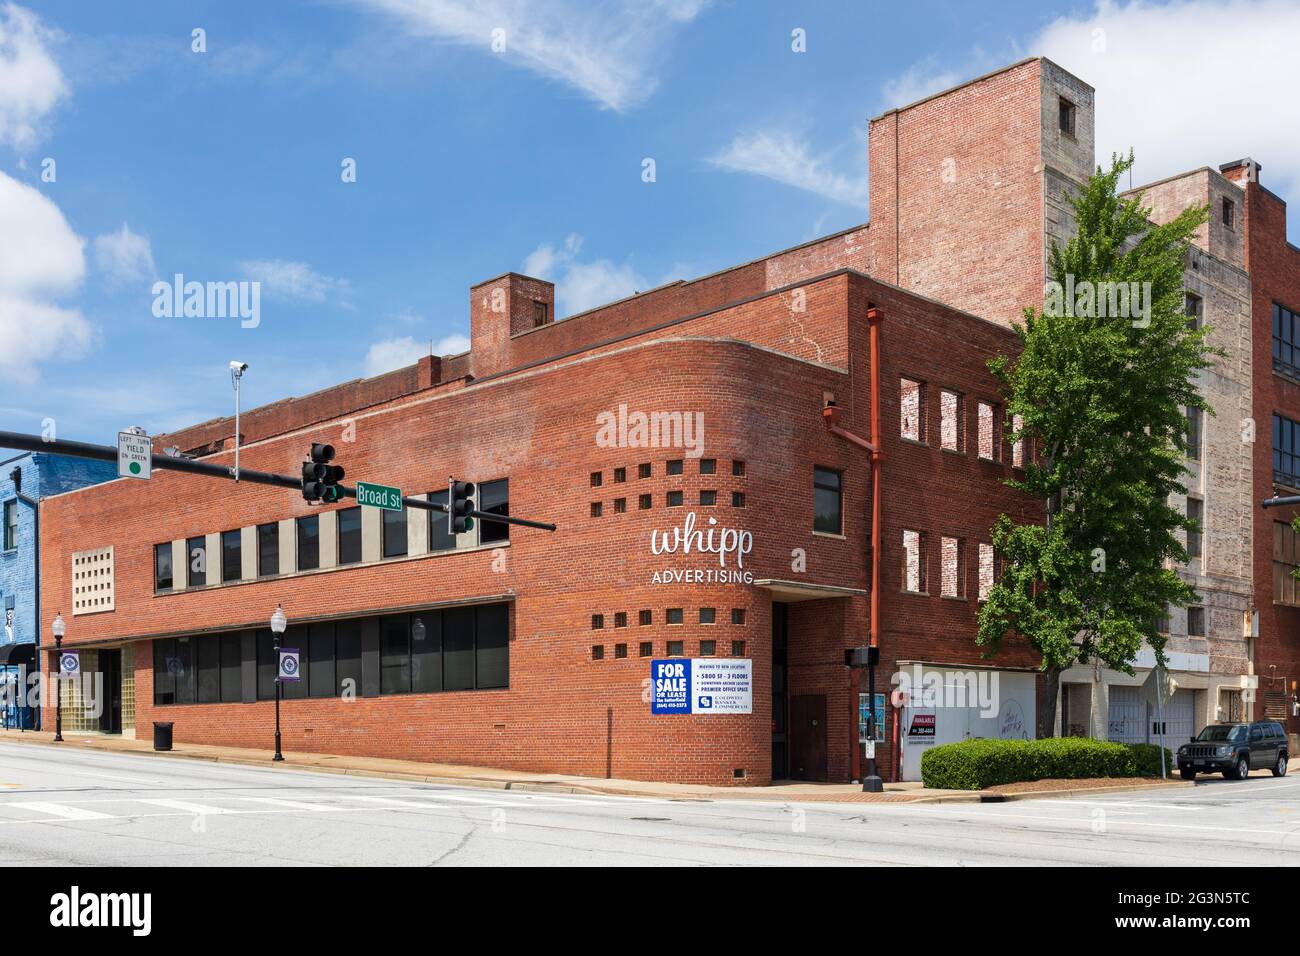 SPARTANBURG, SC, USA-13 JUNE 2021: The Whipp Advertising Building on Broad Street, for Sale or Lease. Horizontales Bild. Stockfoto